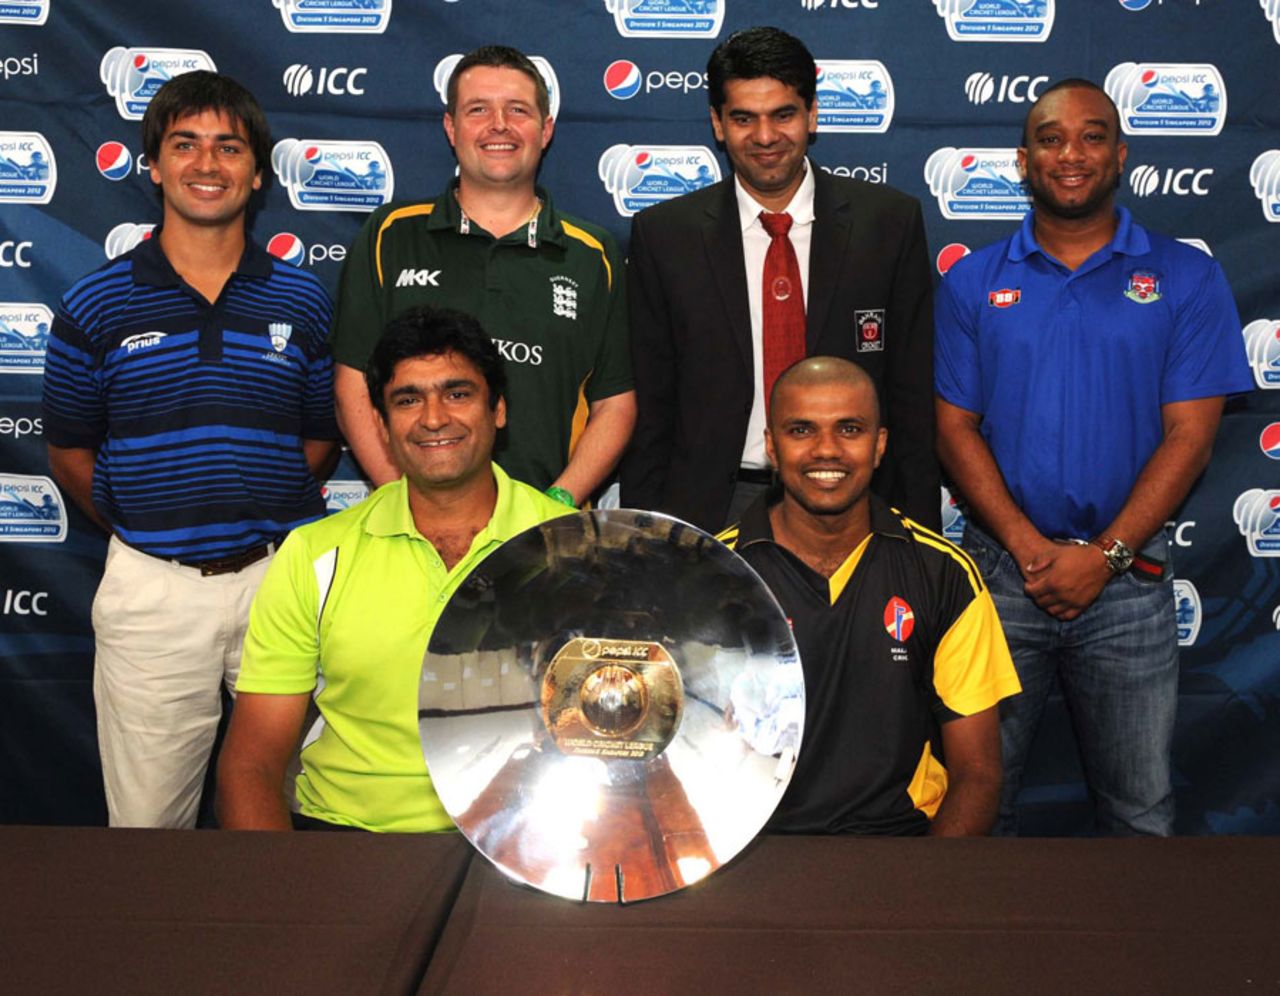 The captains of the five teams in the ICC World Cricket League Division 5, Singapore, February 17, 2012 